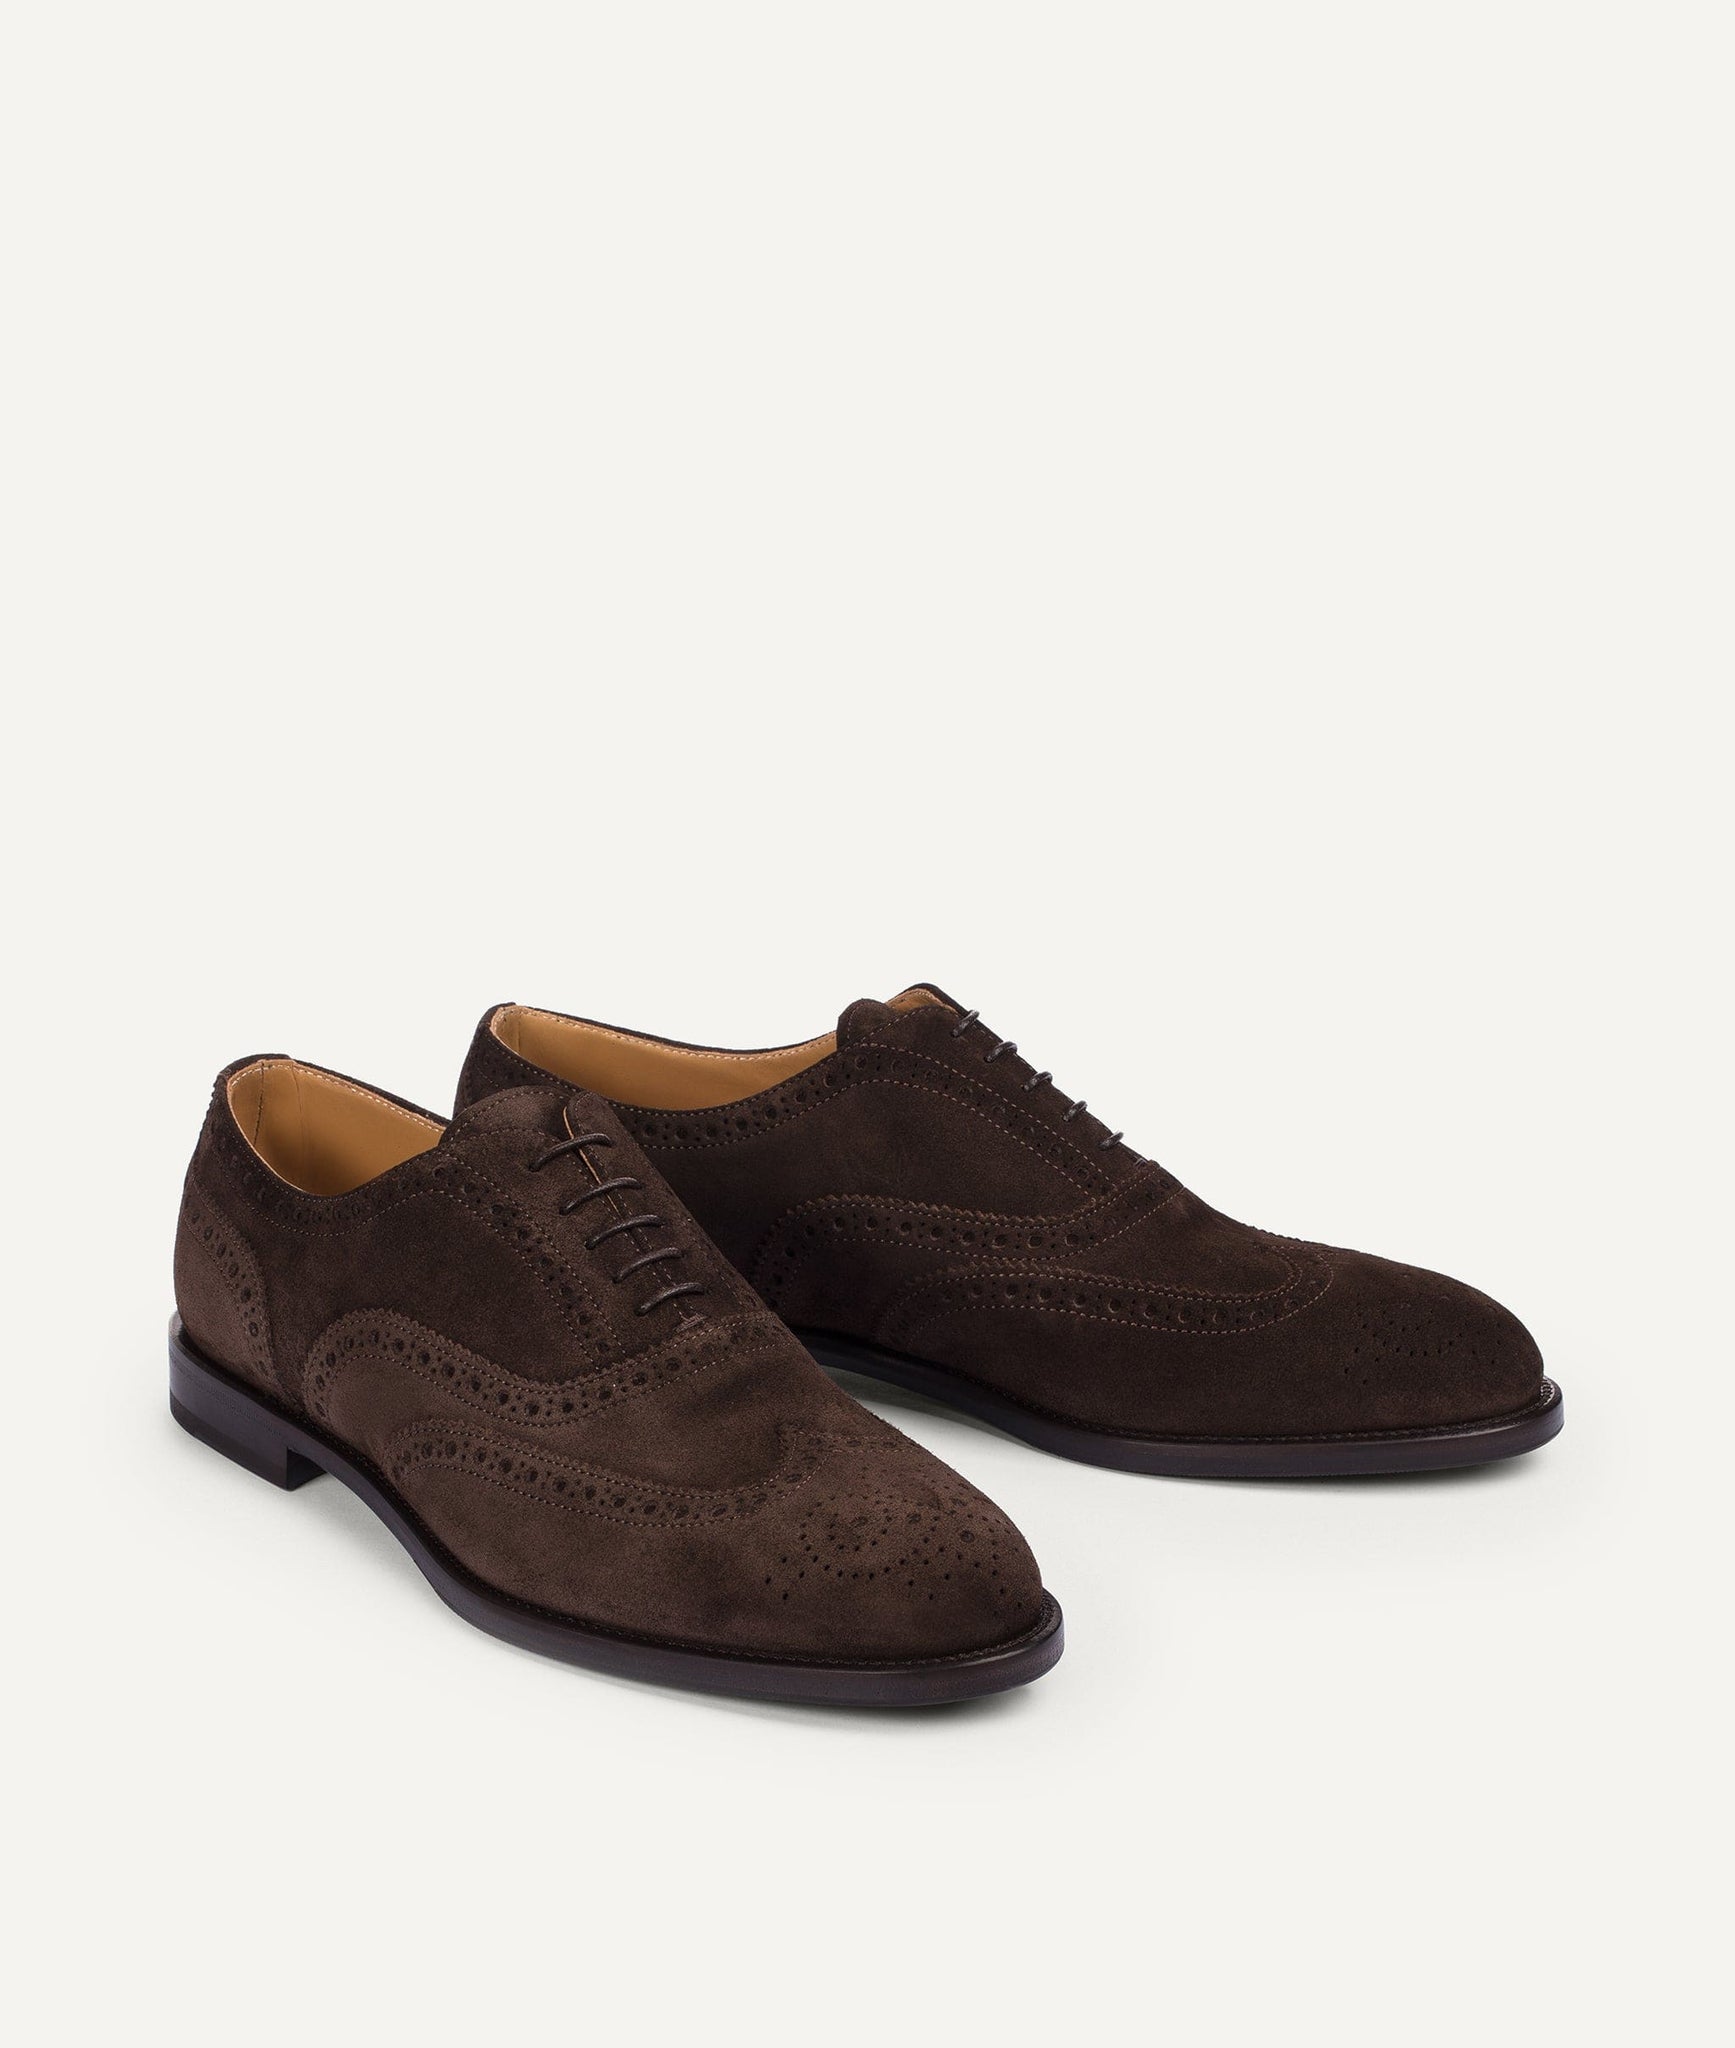 Oxford Full Brogue in Suede